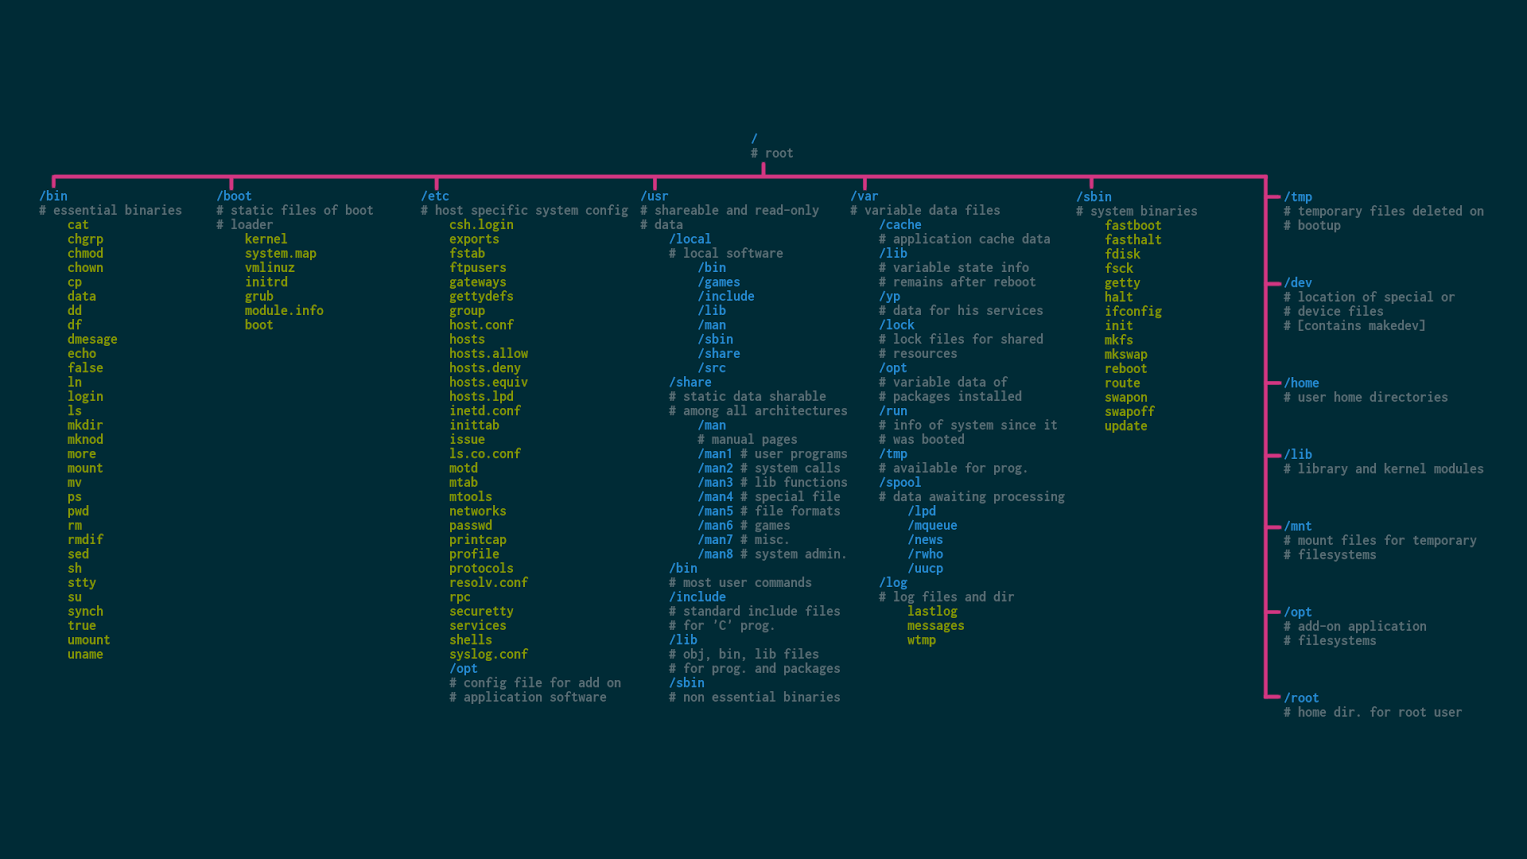 Download Linux Wallpaper That Are Also Cheat Sheets's FOSS